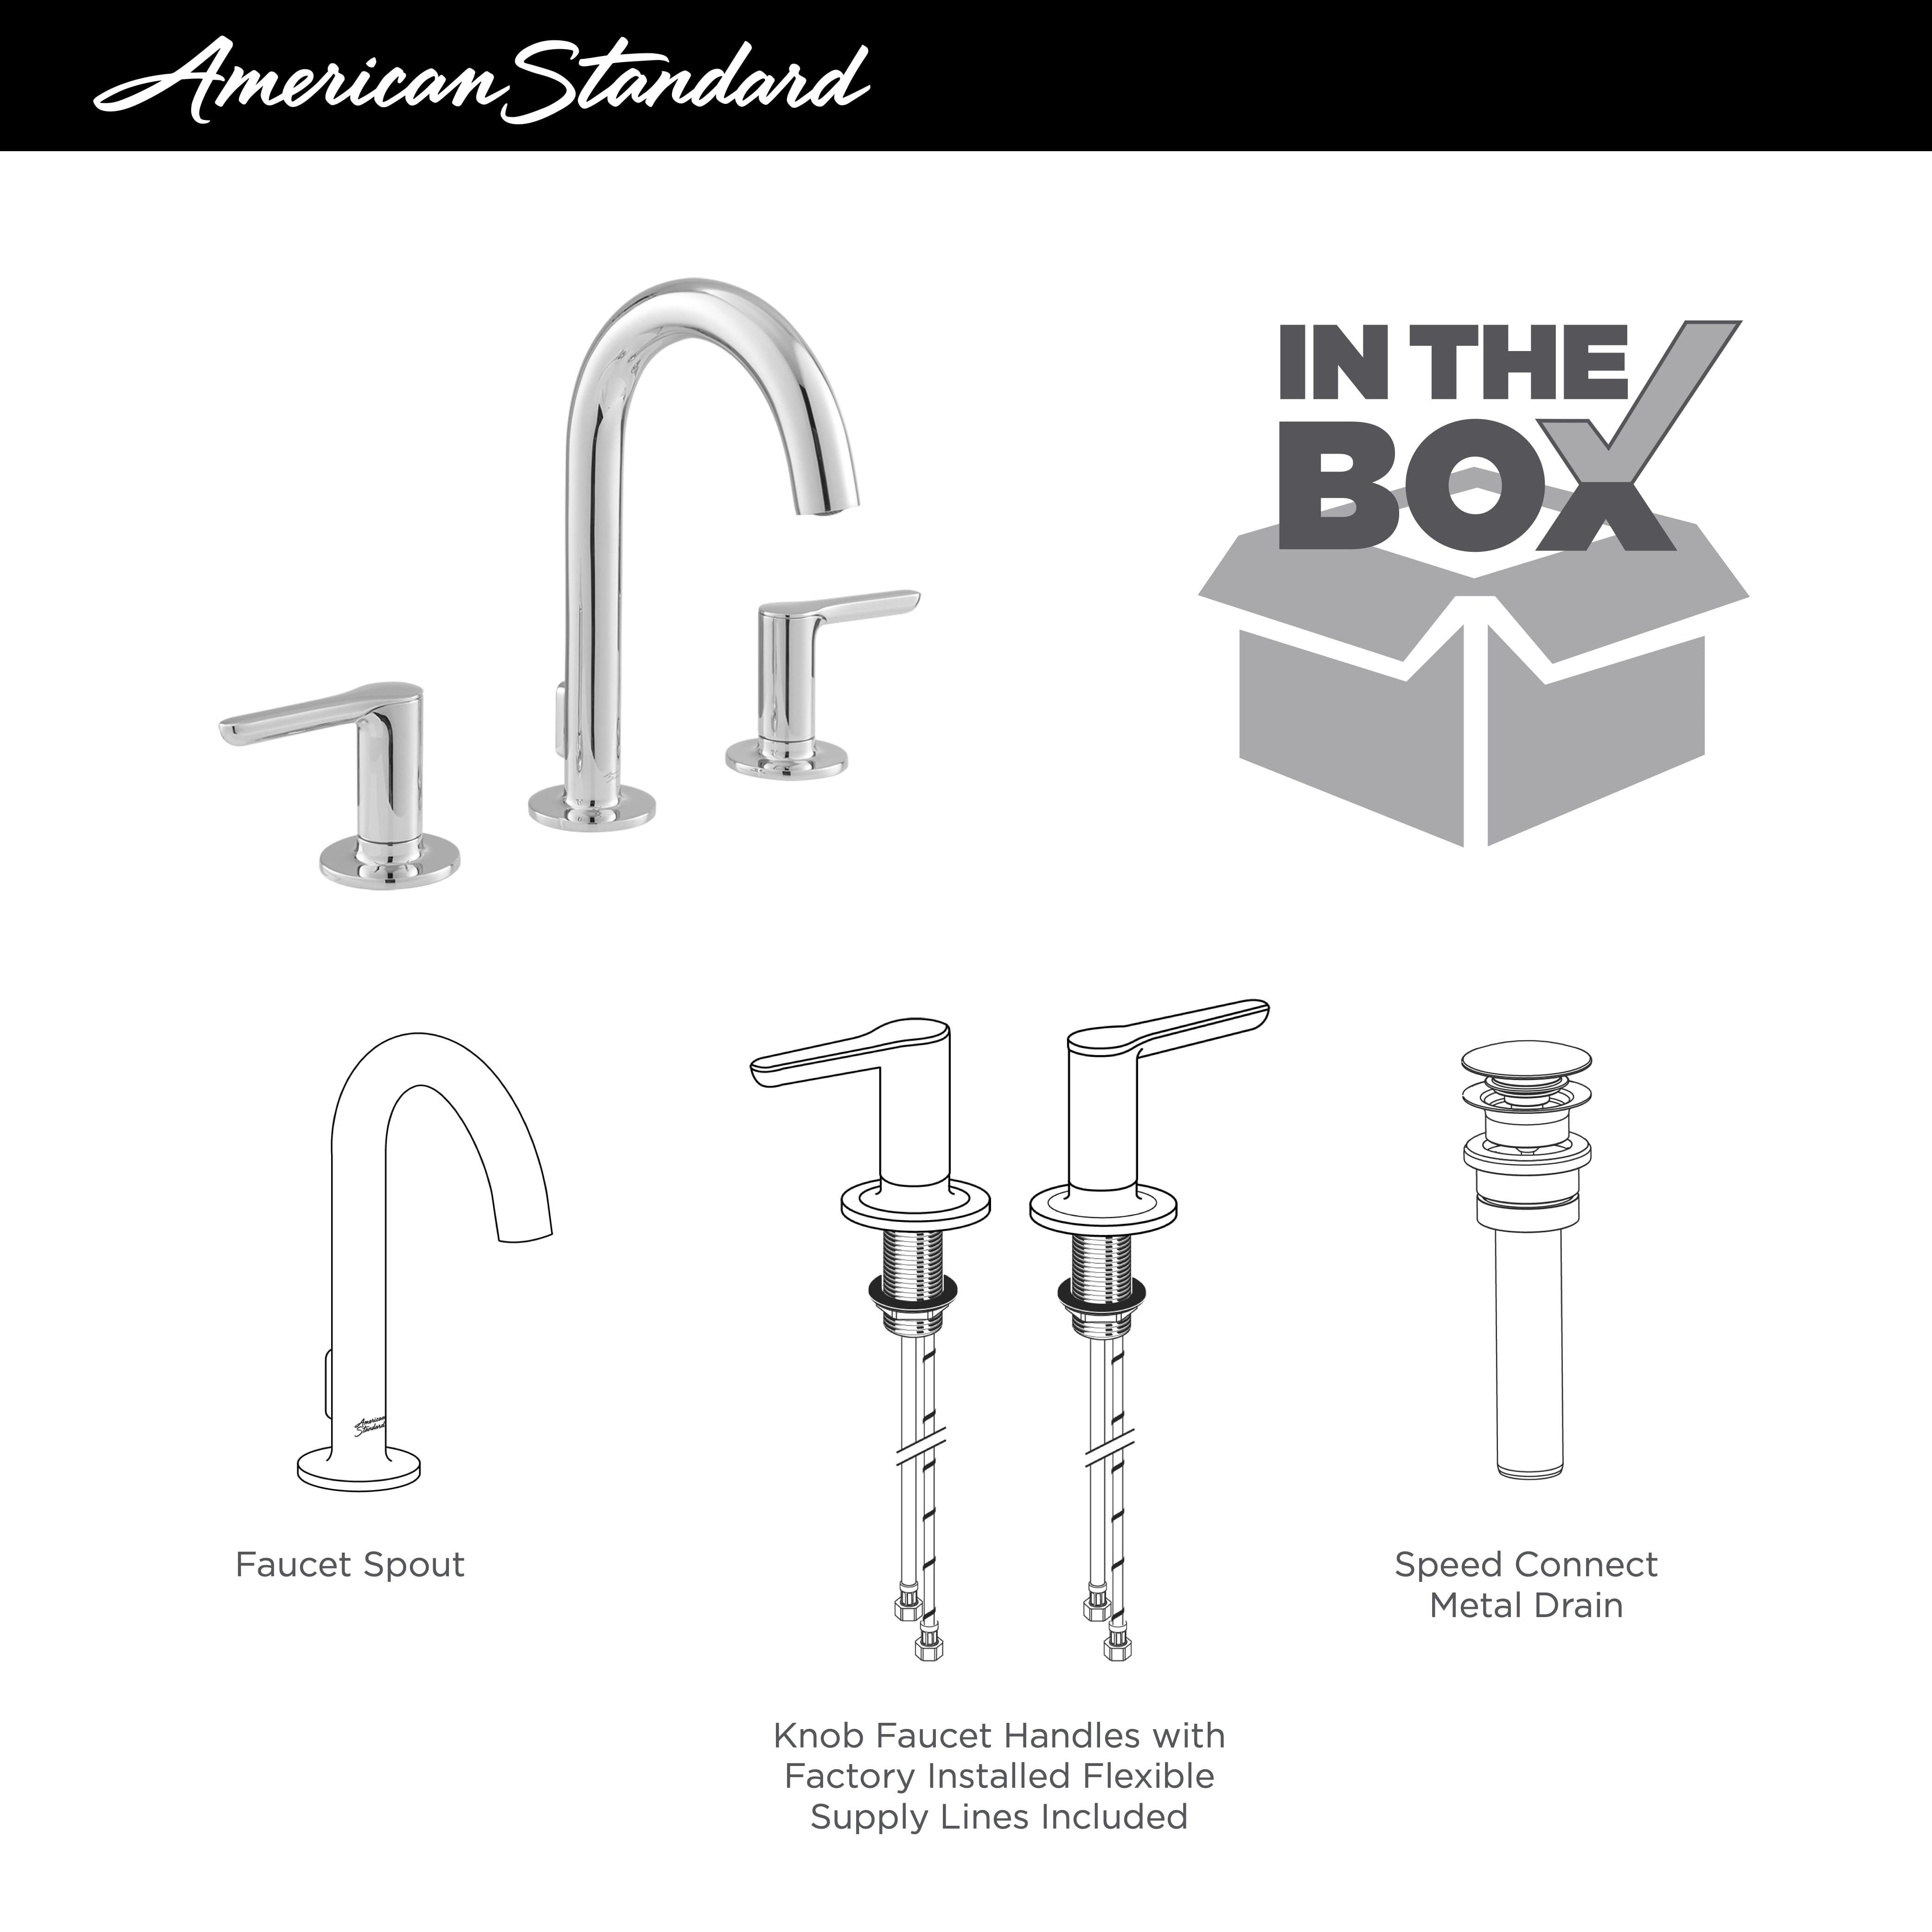 Studio S 8 Inch Widespread 2 Handle Bathroom Faucet 12 gpm 45 L min With Lever Handles BRUSHED NICKEL